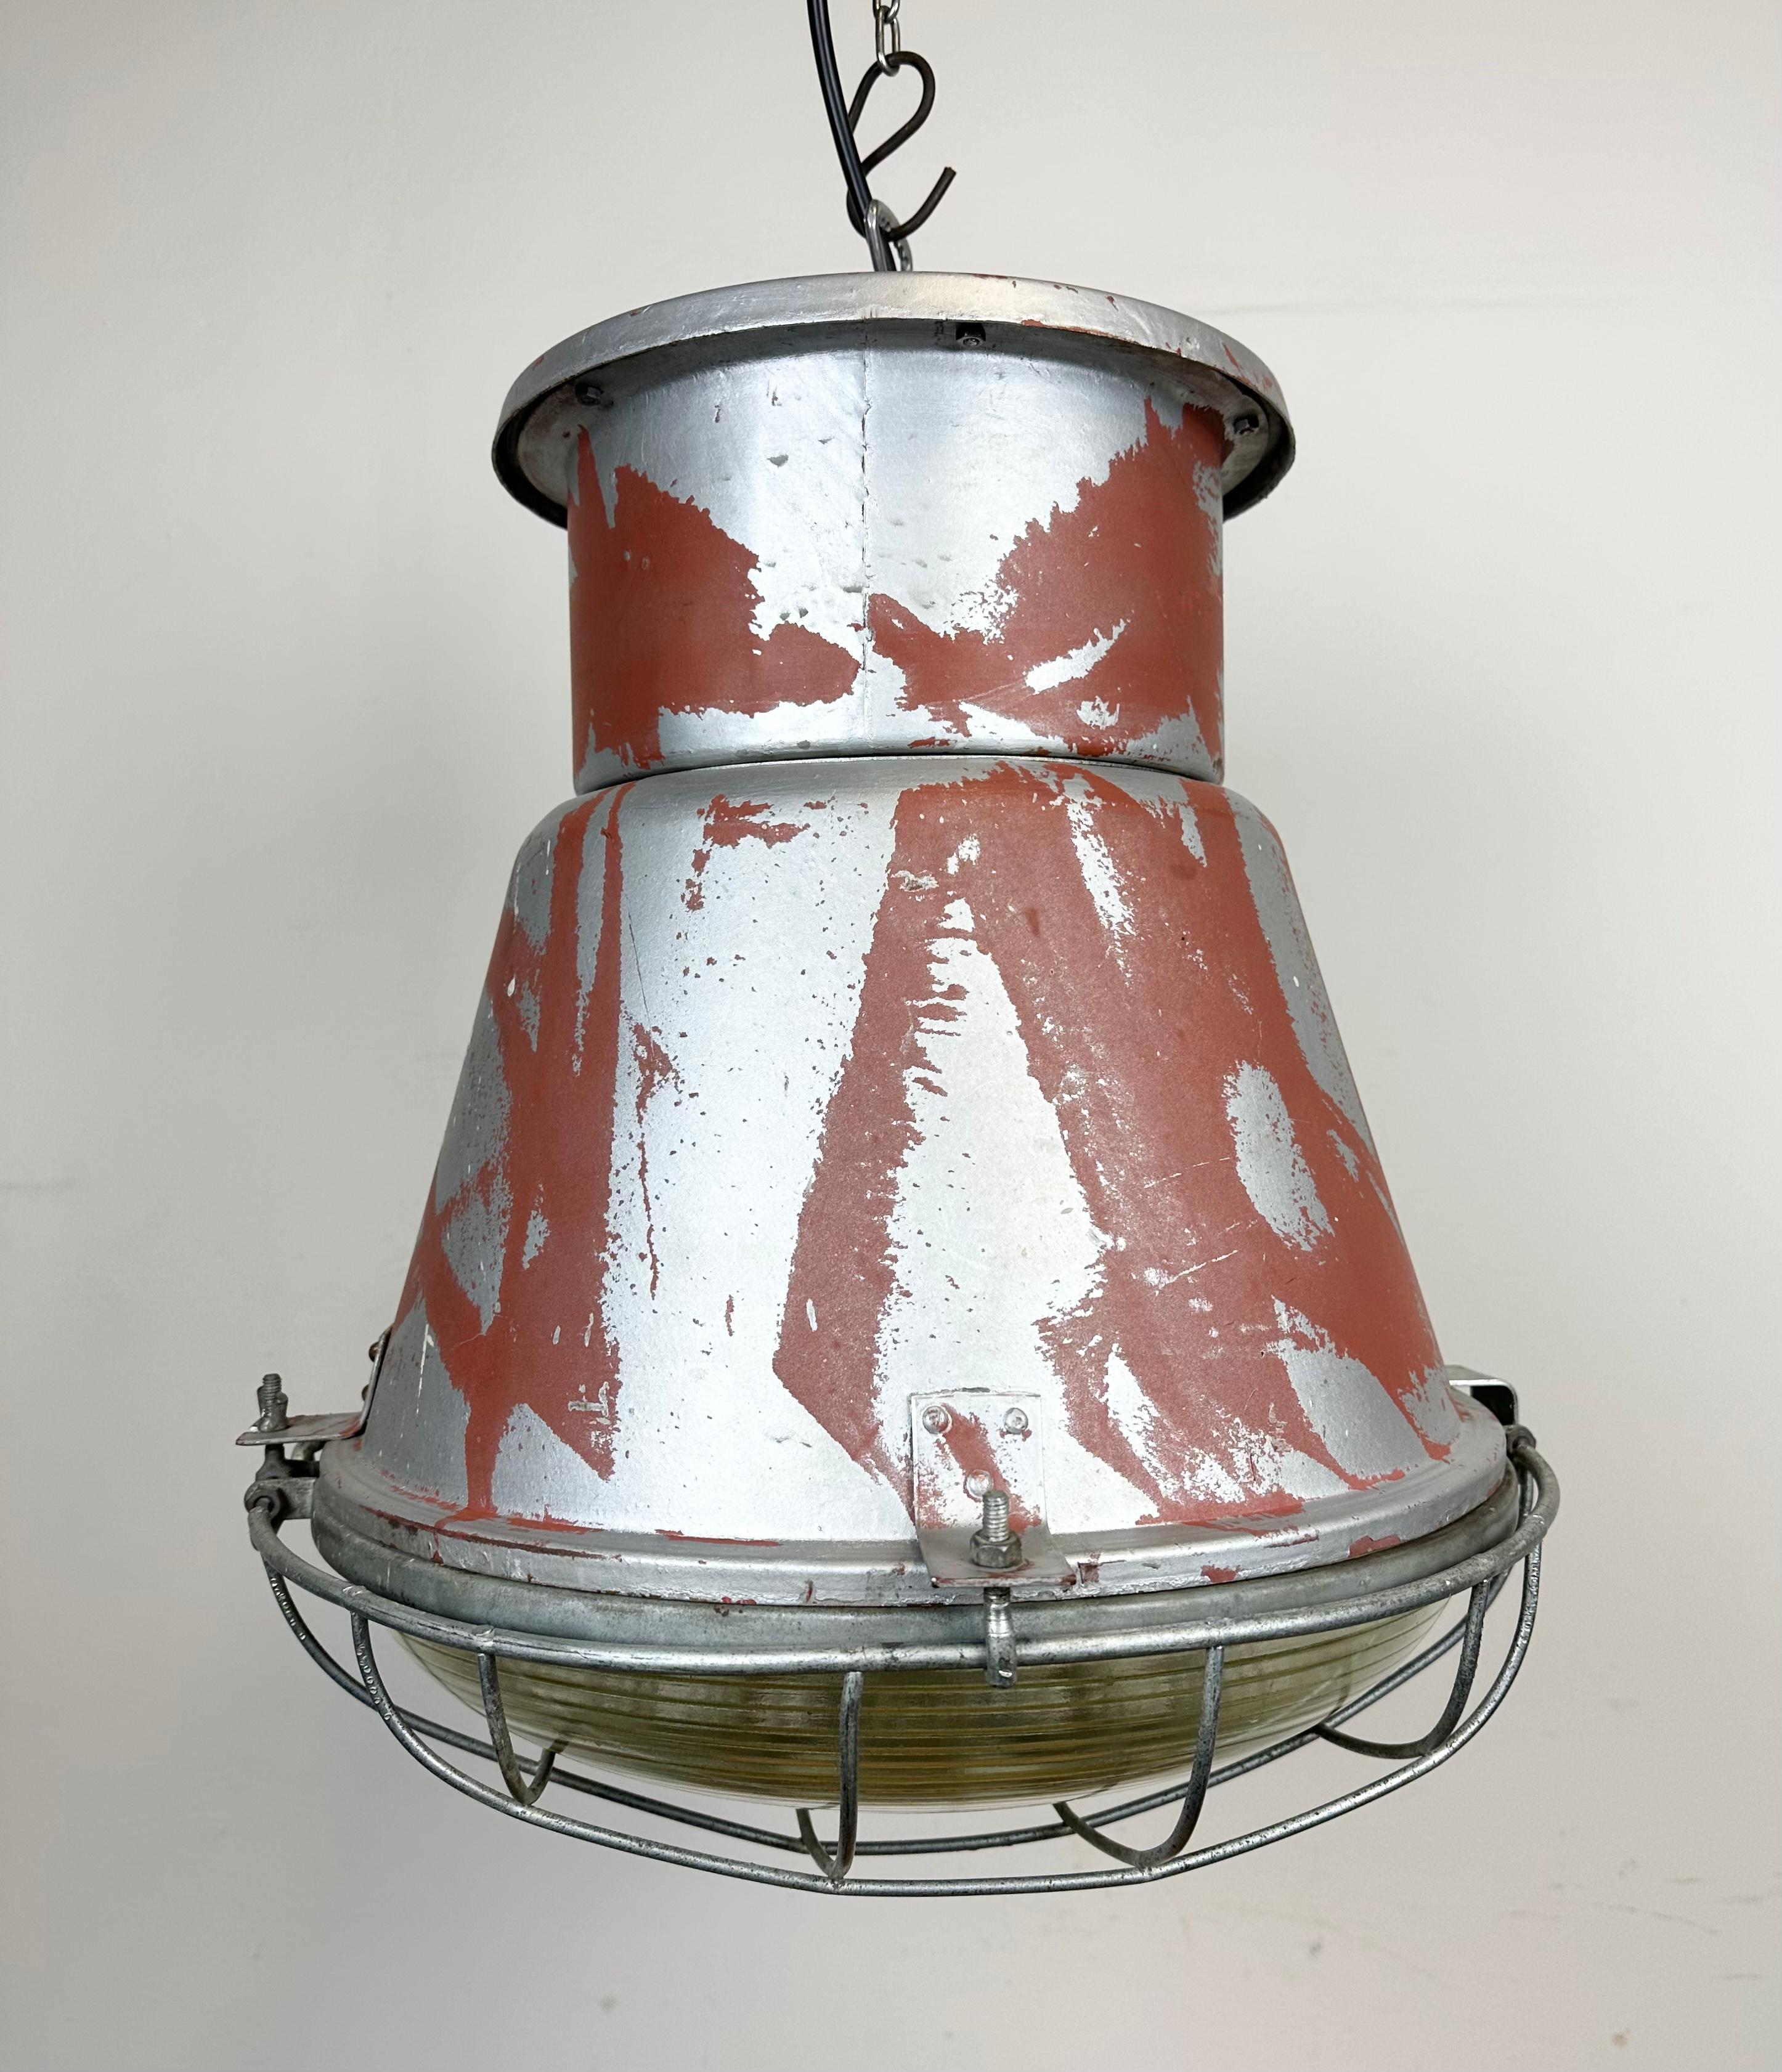 Polish Industrial Cage Factory Pendant Lamp with Glass Cover from Mesko, 1970s For Sale